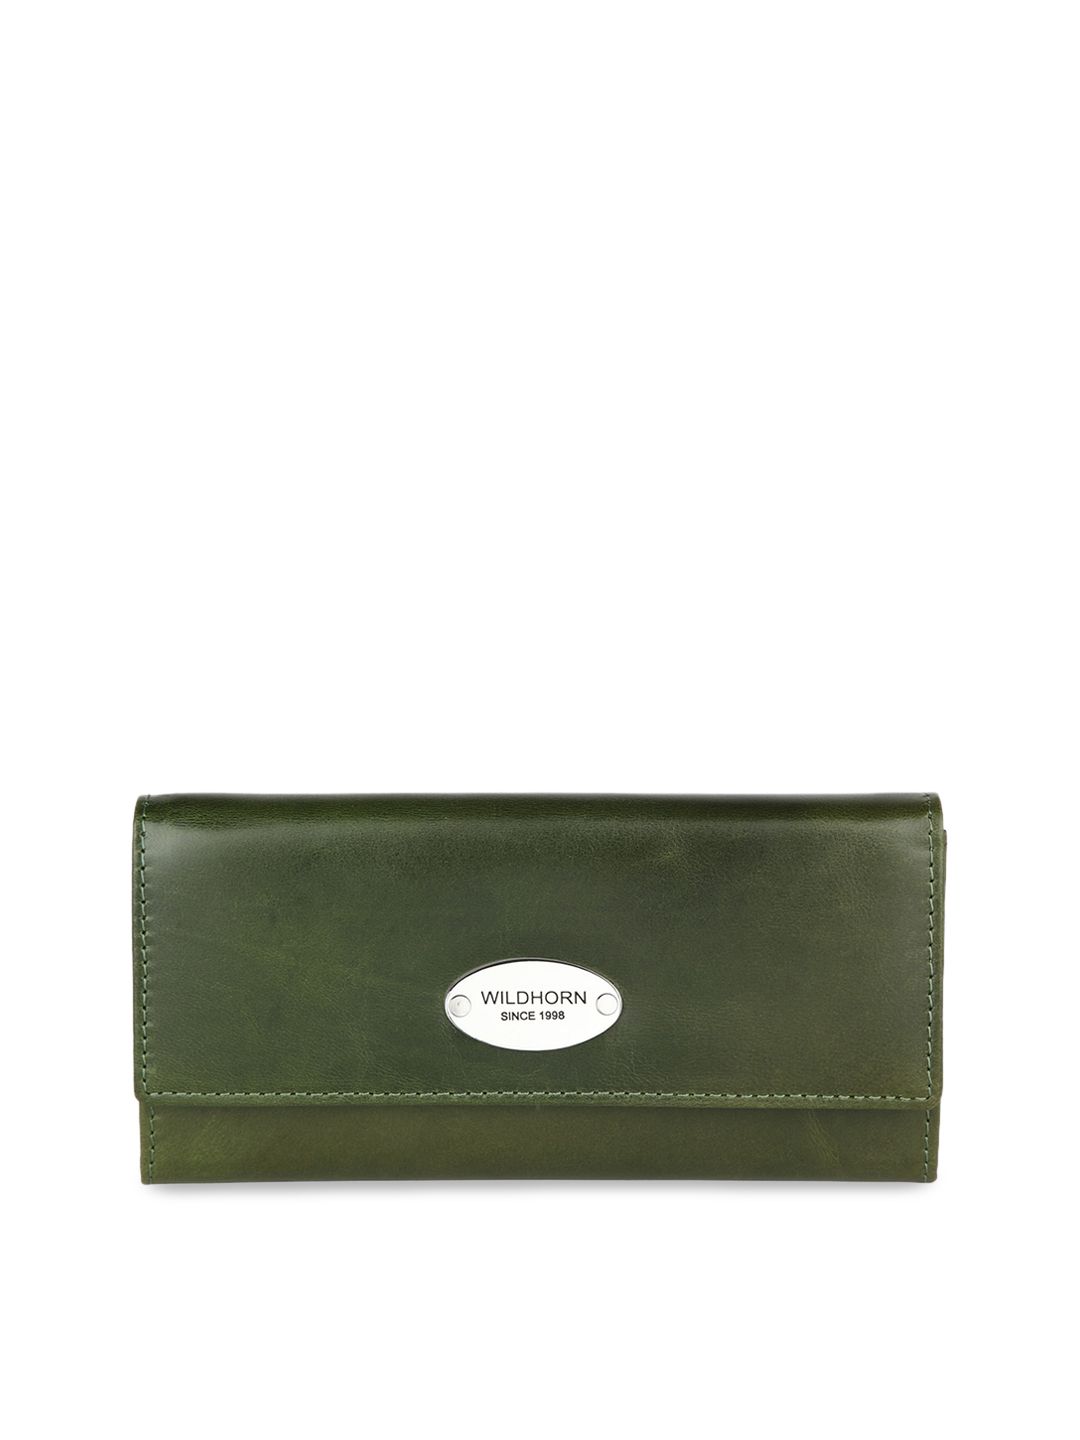 WildHorn Women Olive Green Solid Leather Envelope Wallet Price in India